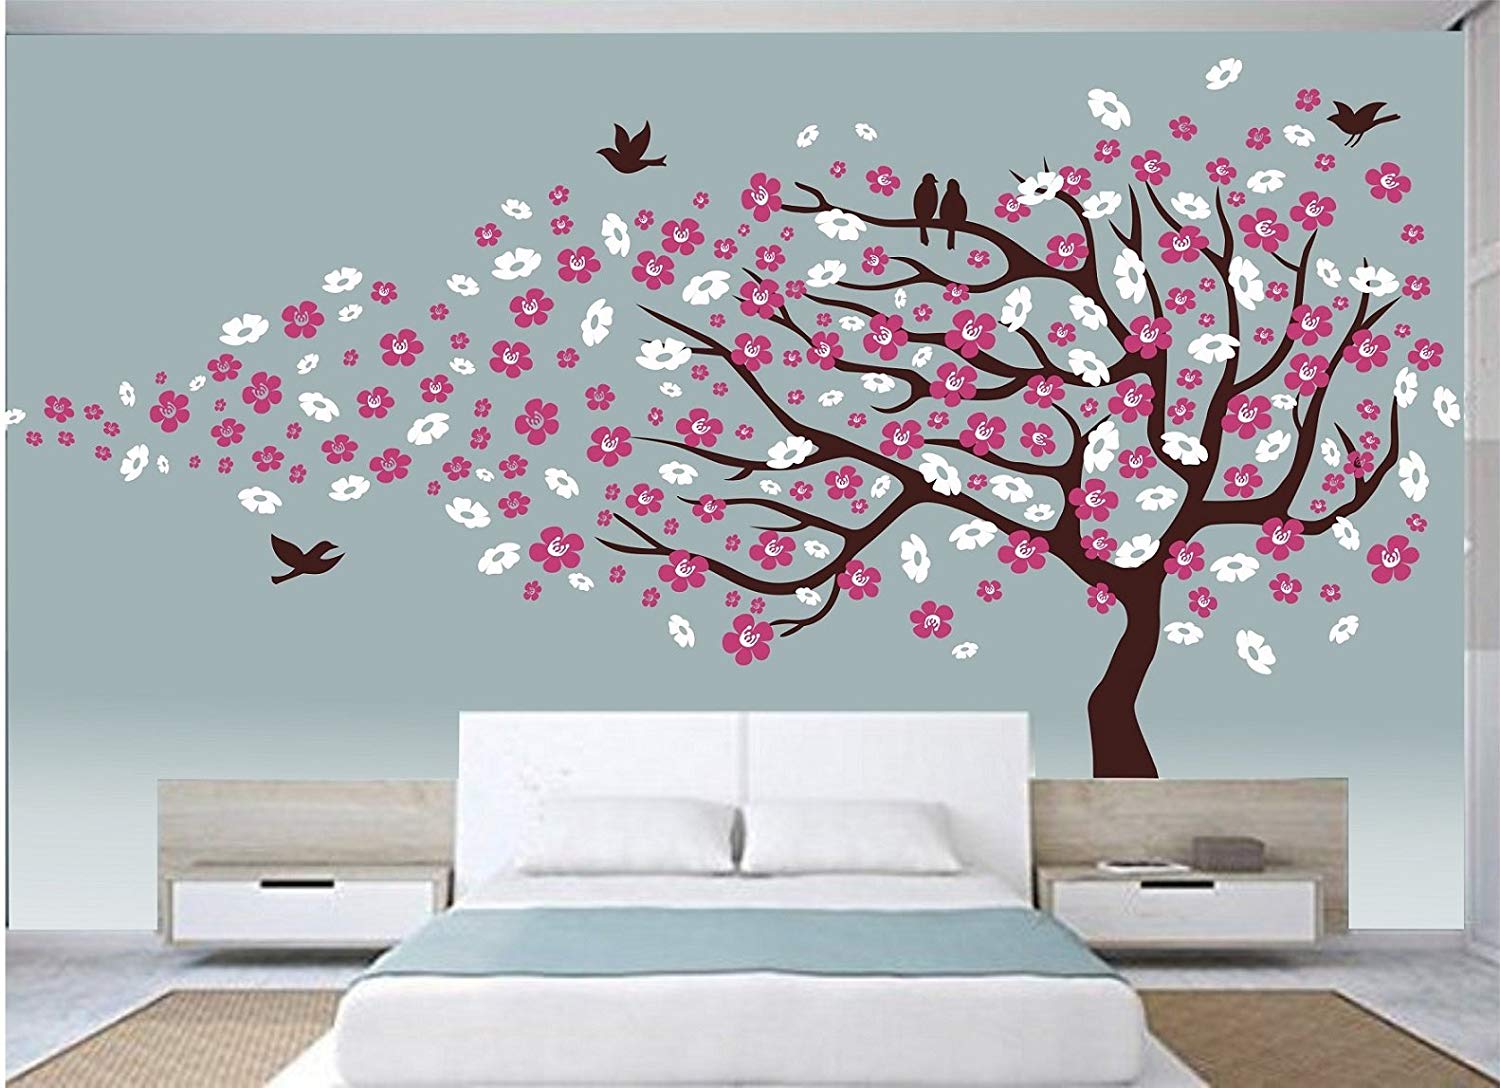 Buy Asmi Collections Wall Stickers Beautiful Large Cherry Blossom